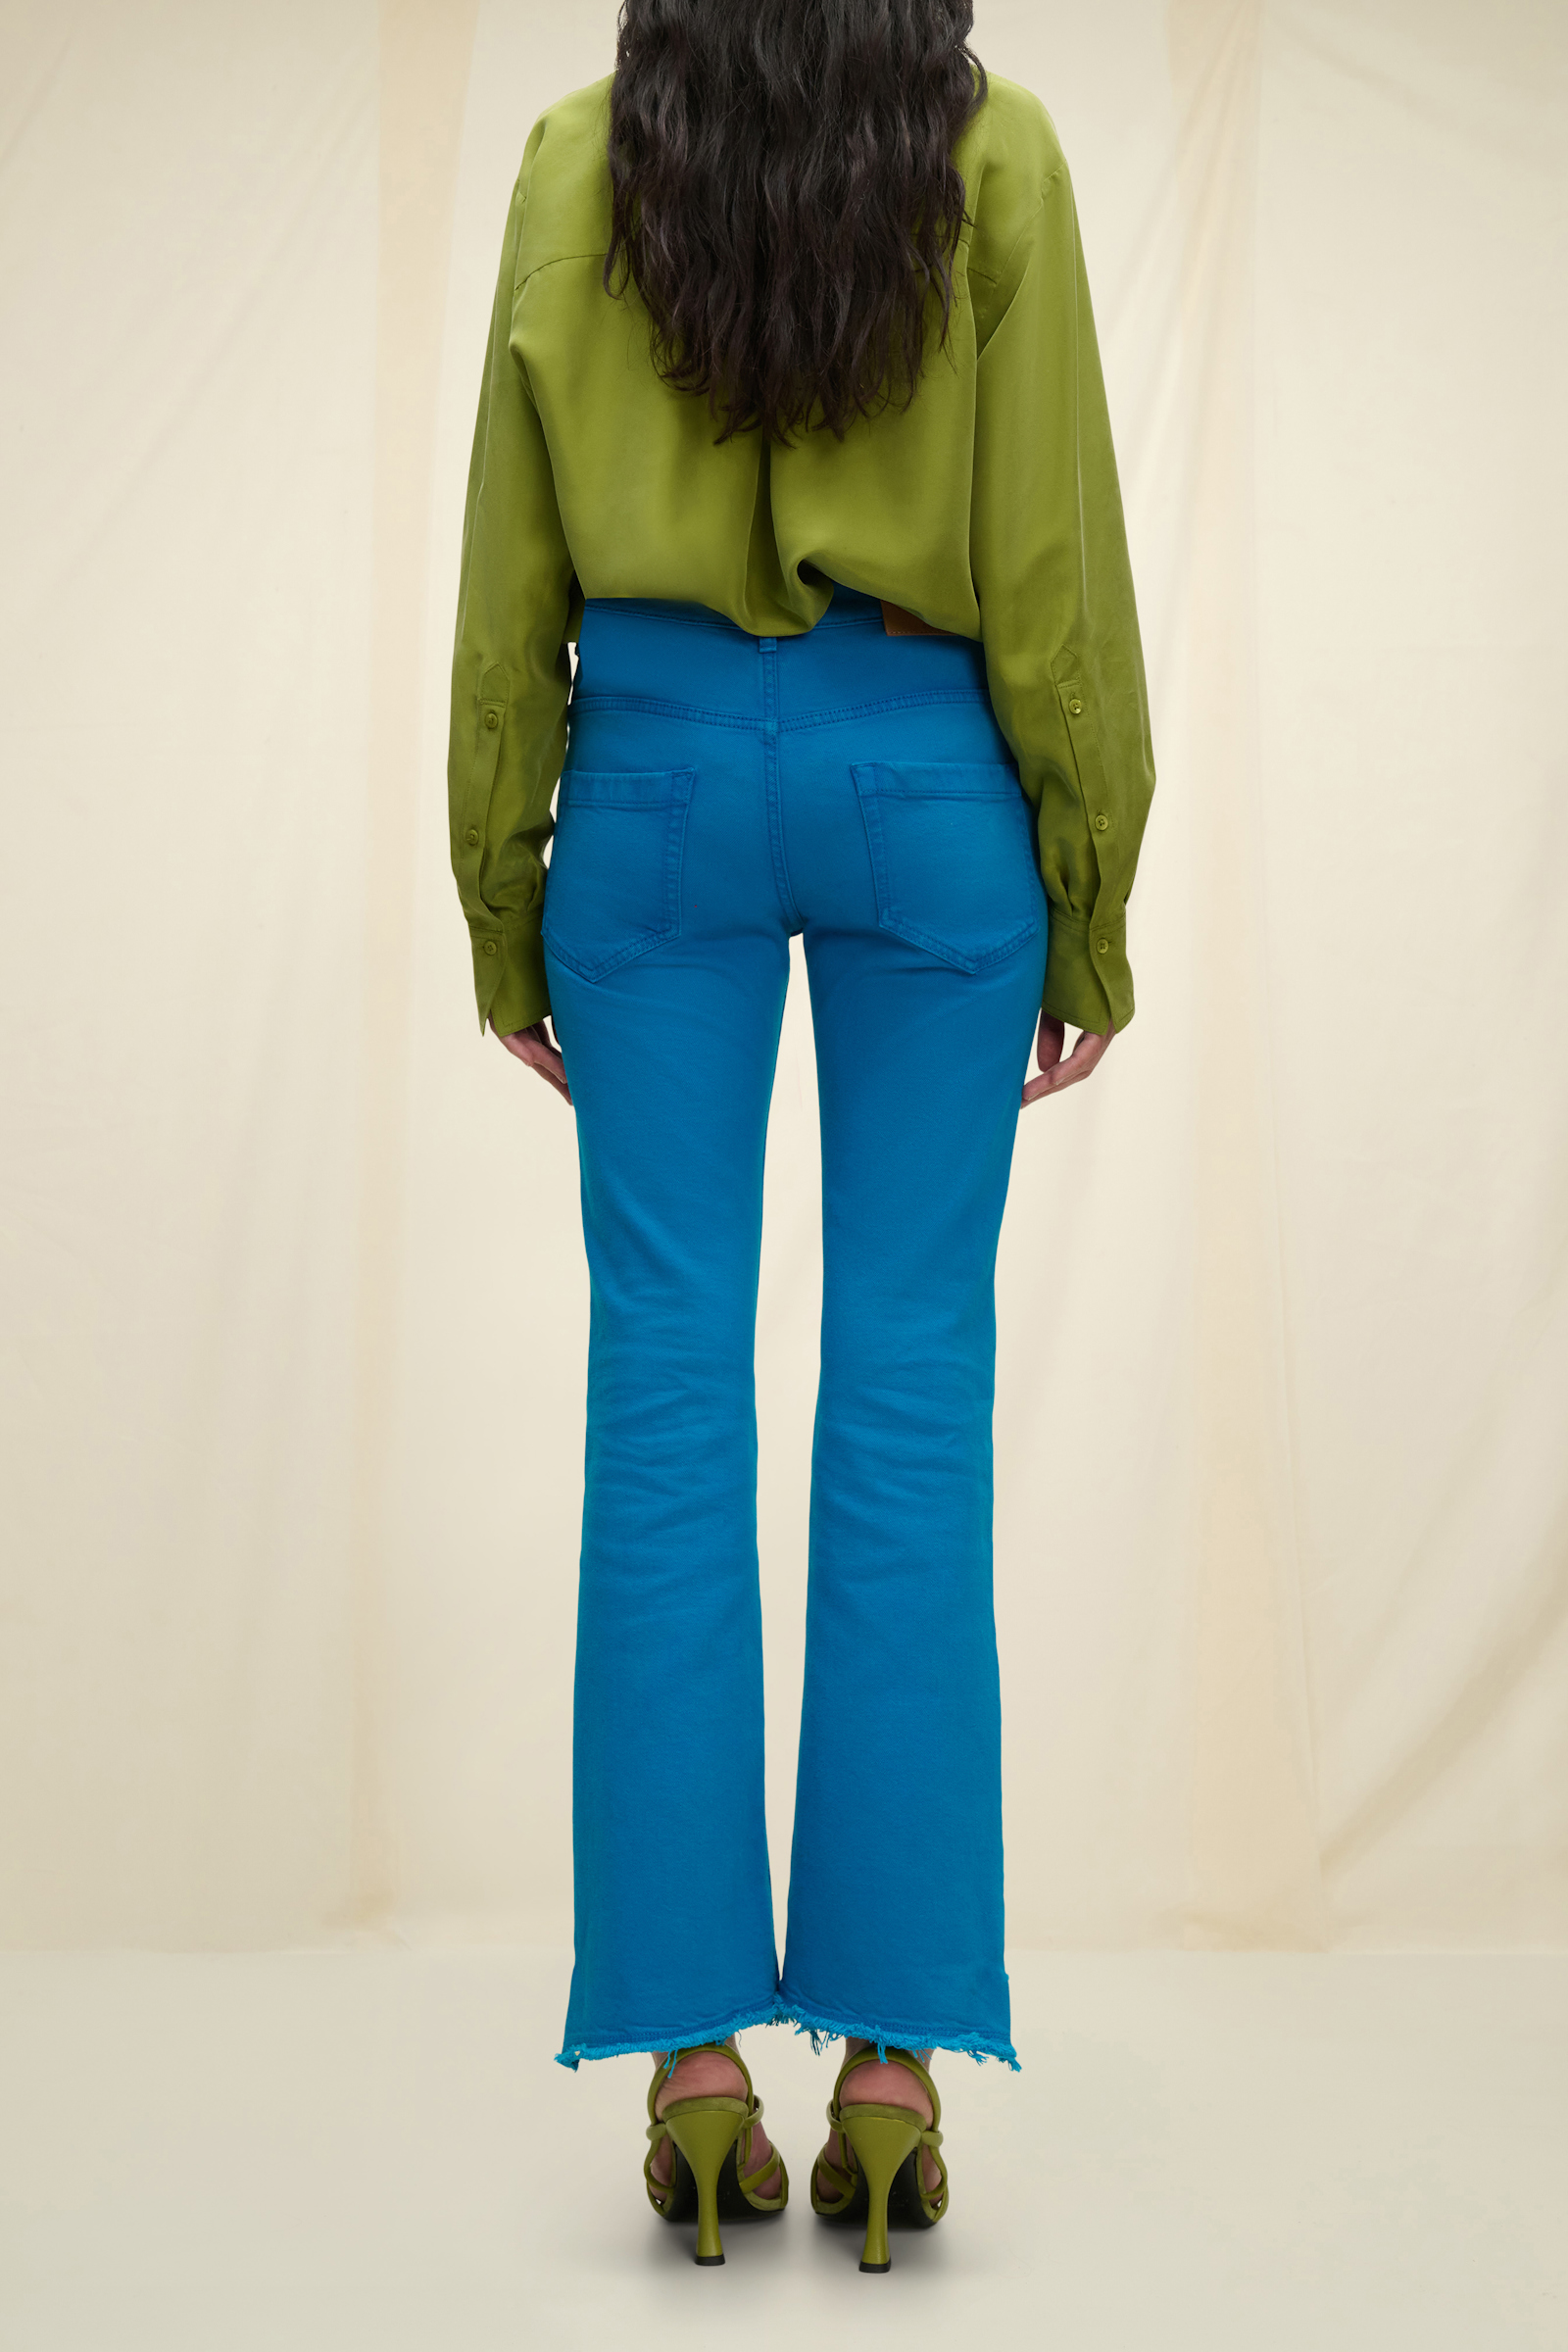 Dorothee Schumacher Flared ankle jeans with cutoff hem aqua blue